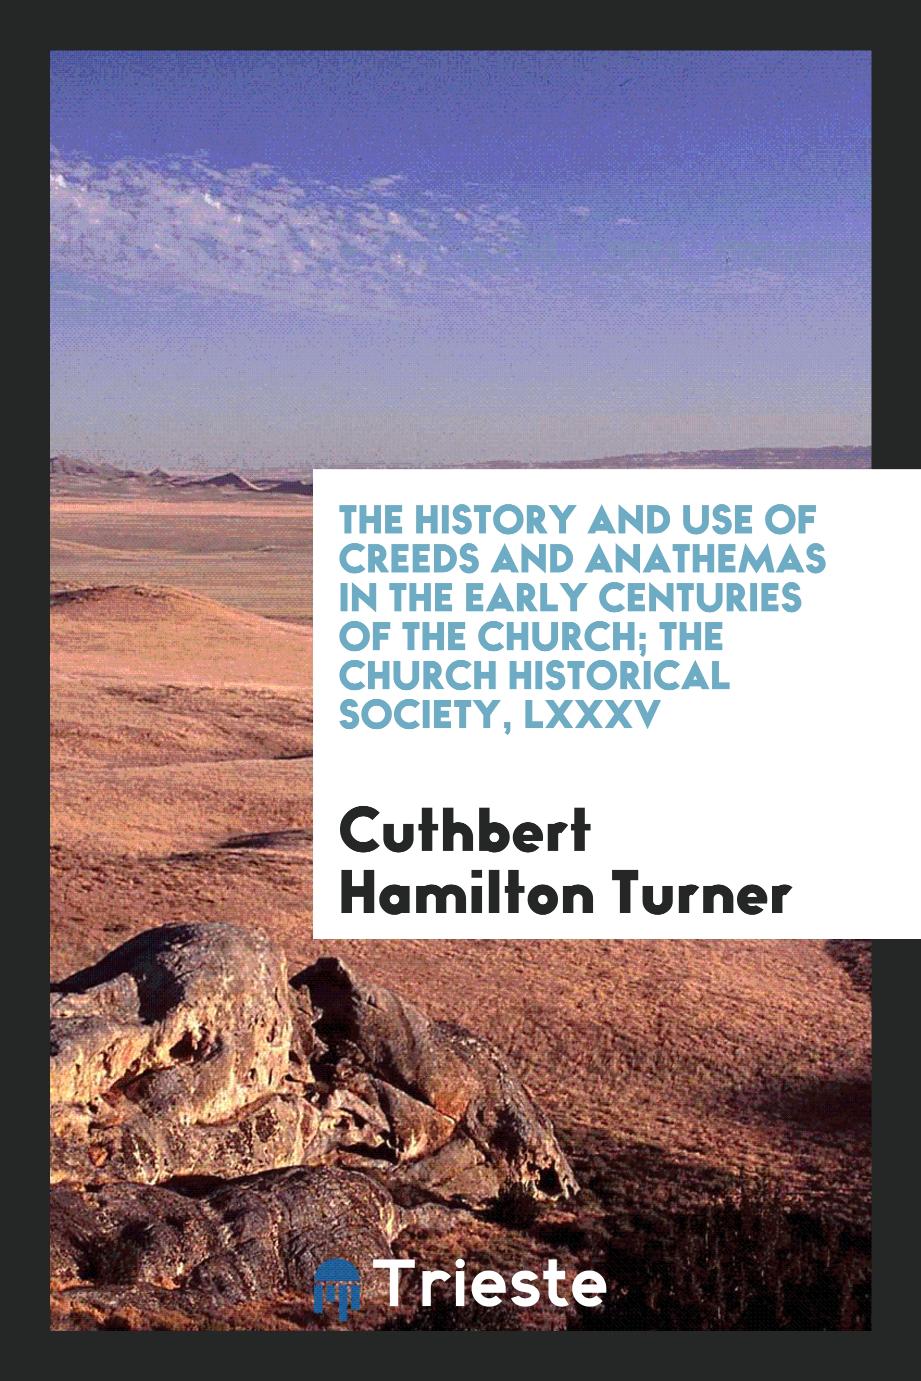 The History and Use of Creeds and Anathemas in the Early Centuries of the Church; The Church Historical Society, LXXXV